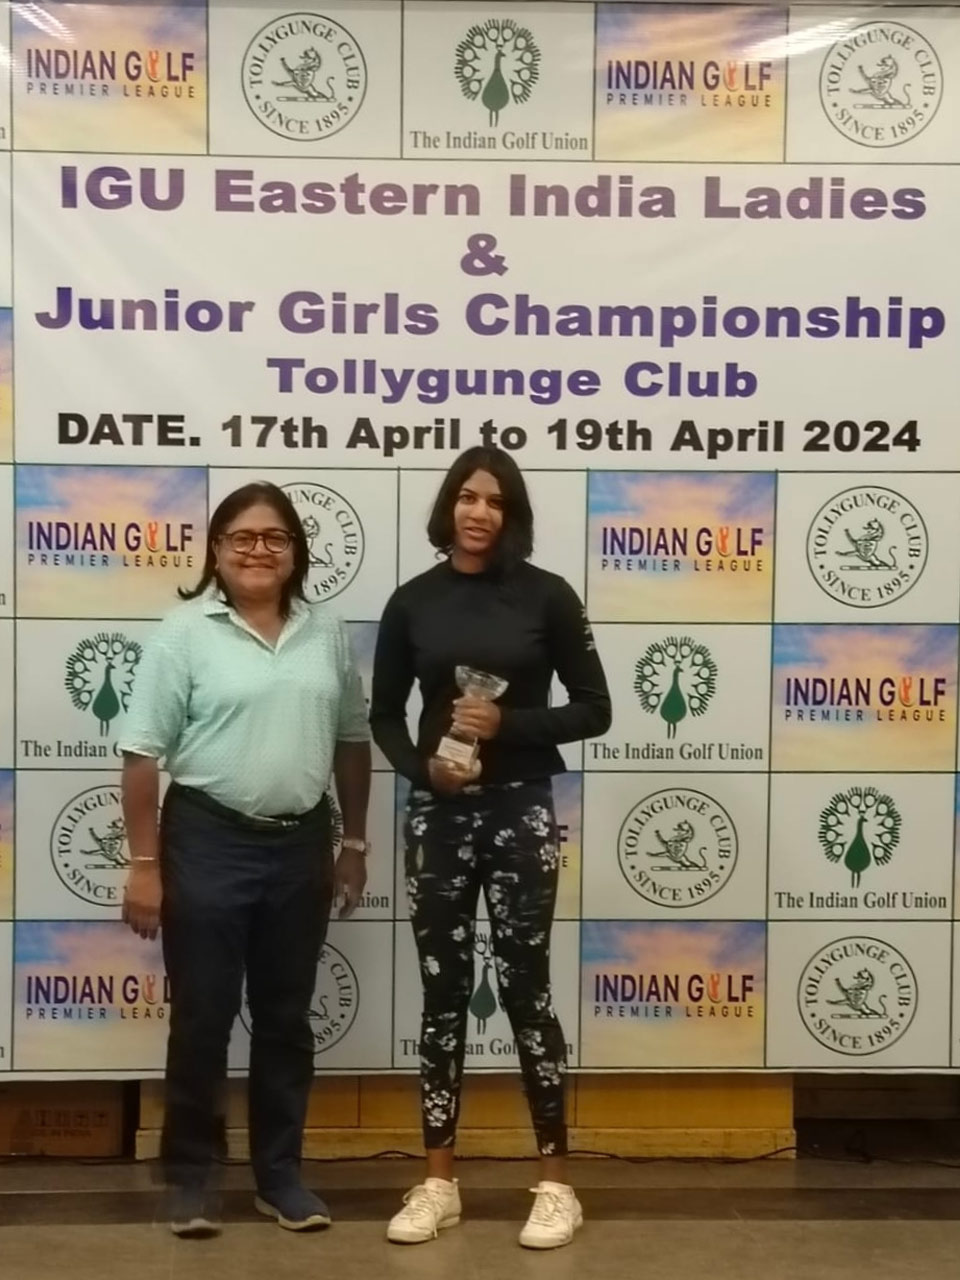 Dia Cris Kumar finished 2nd at the IGU Eastern India Ladies & Junior Girls National Golf Championship held at The Tollygunge Club in Kolkata, with scores of 79, 78 & 75.